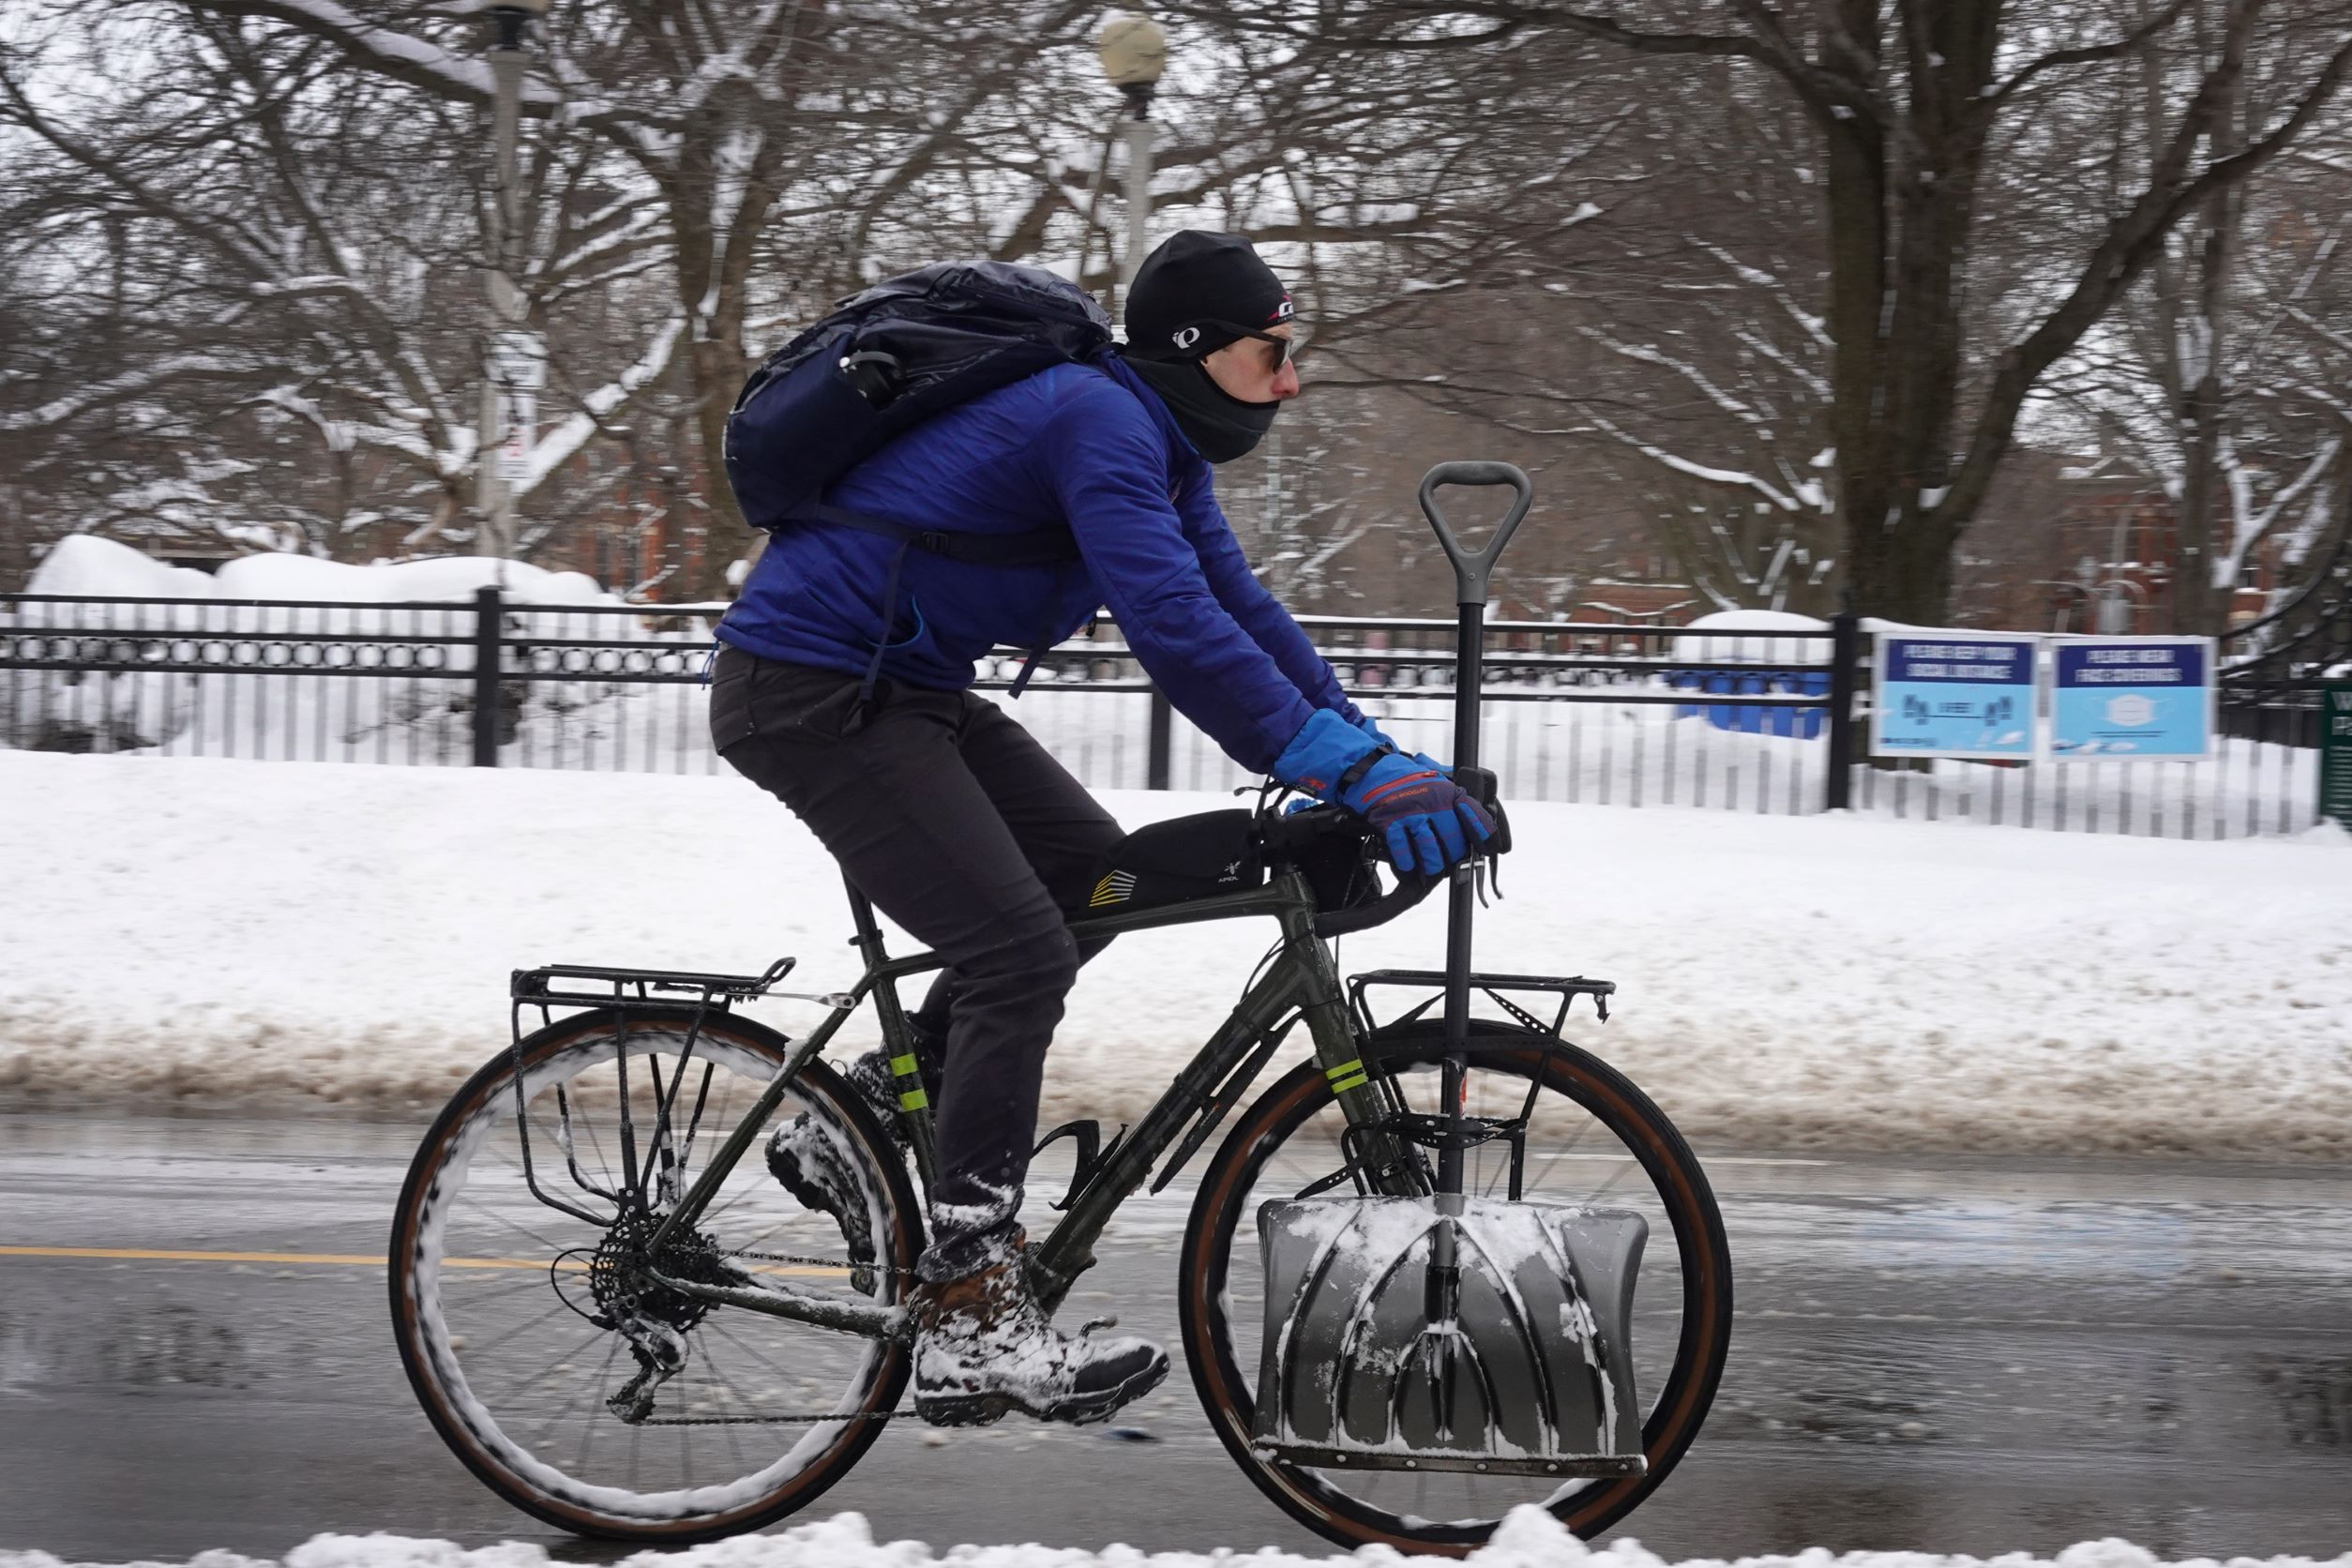 A Chicago cyclist with a shovel rides down the street dressed in winter cycling gear